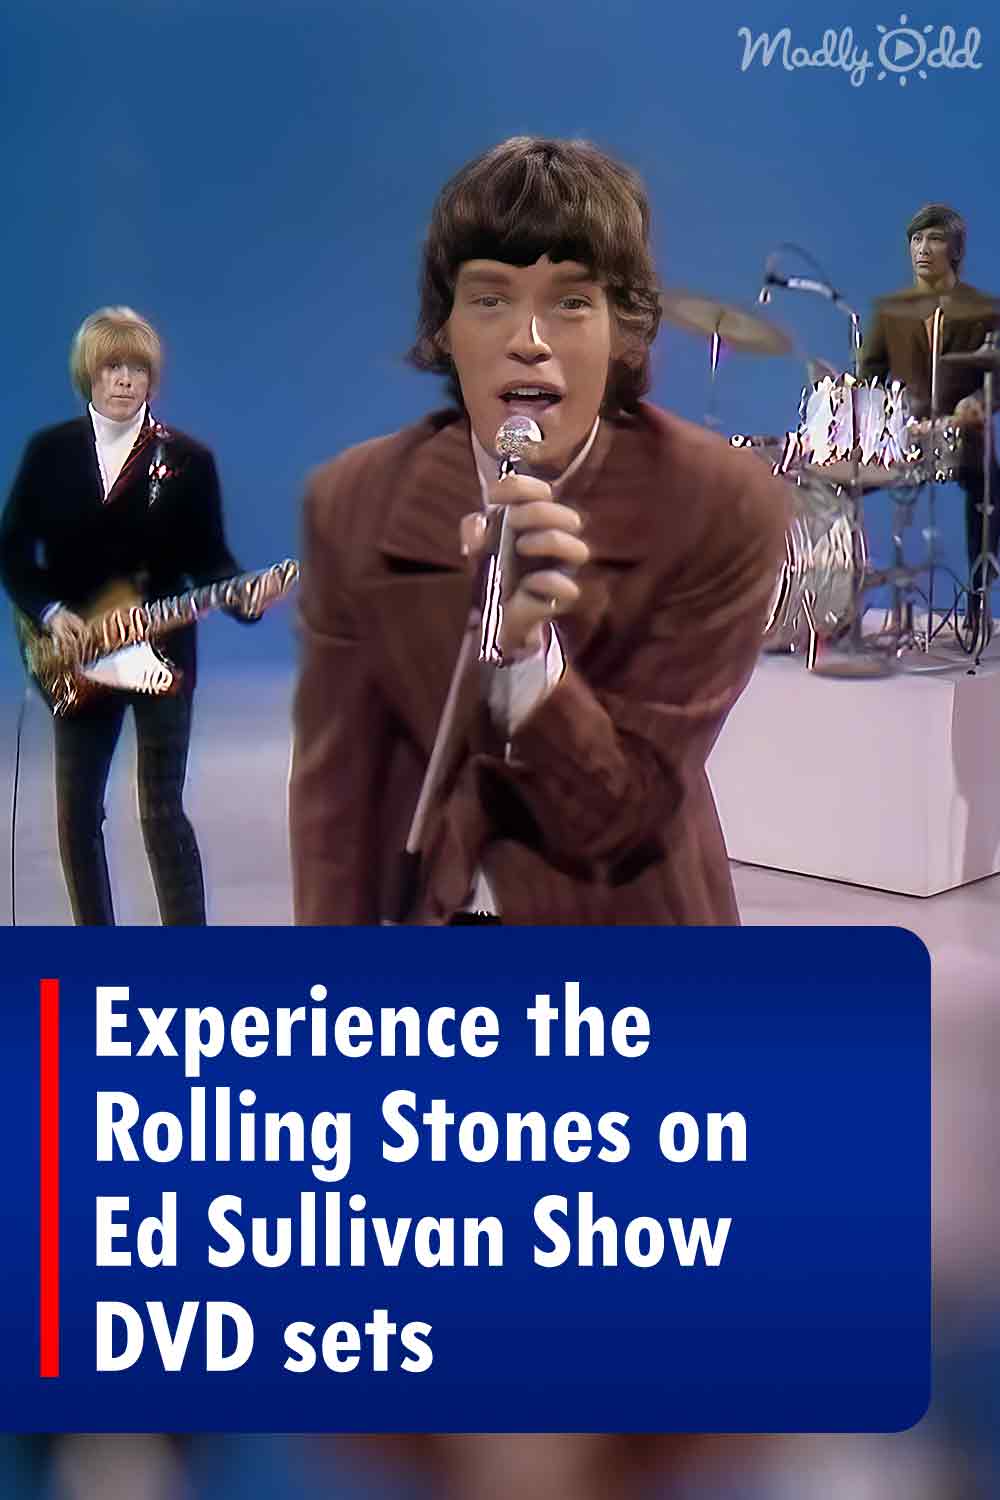 Experience the Rolling Stones on the Ed Sullivan Show